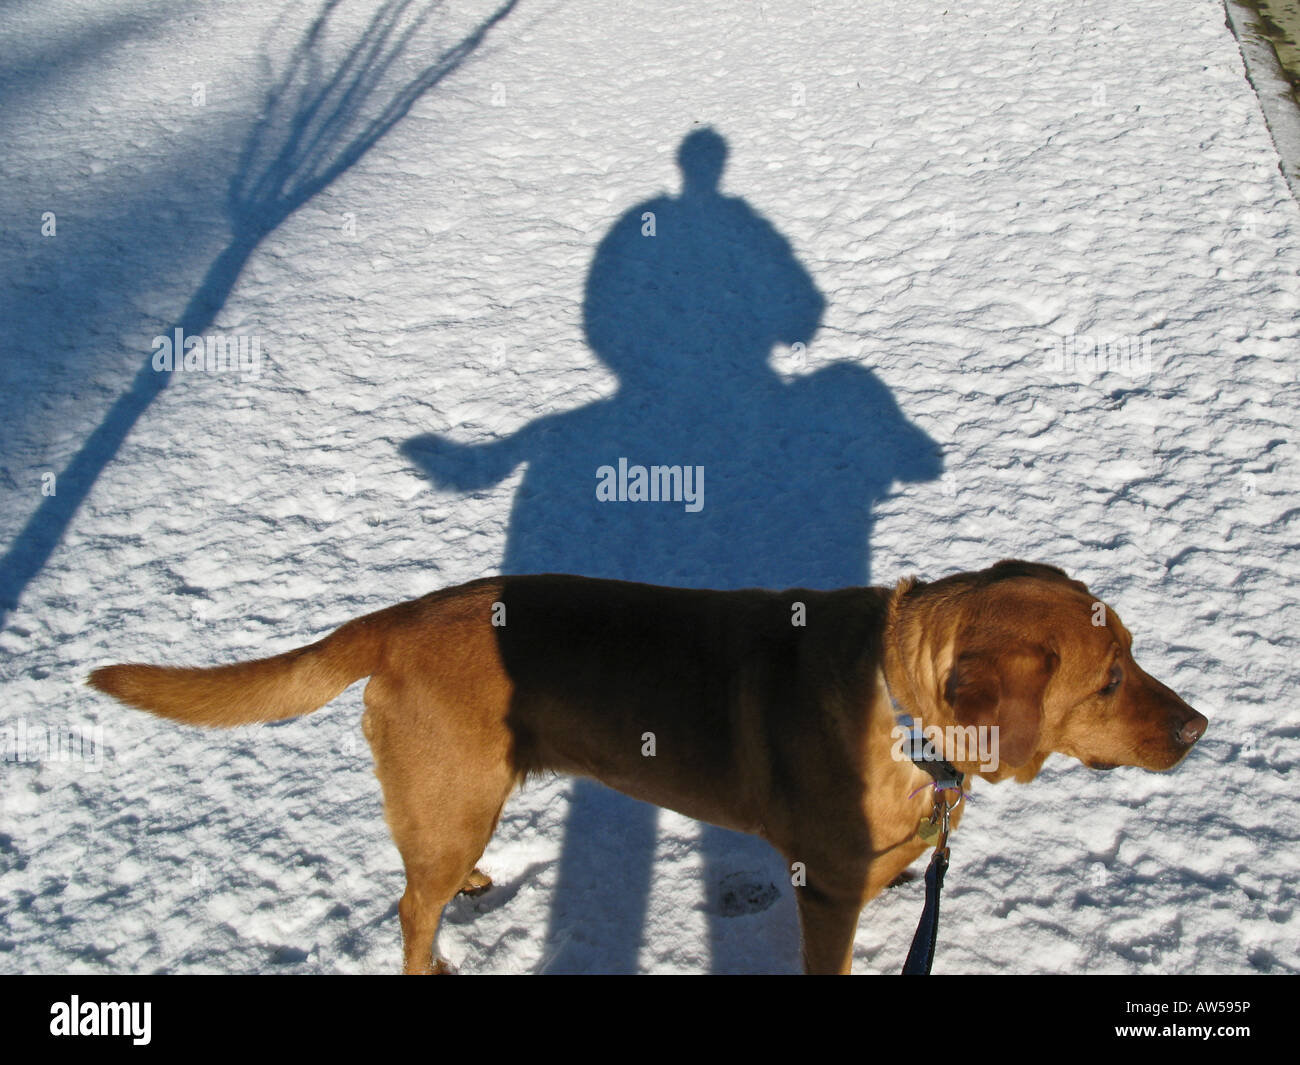 West Vancouver, BC, Canada Shadow of man and labrador dog Stock Photo